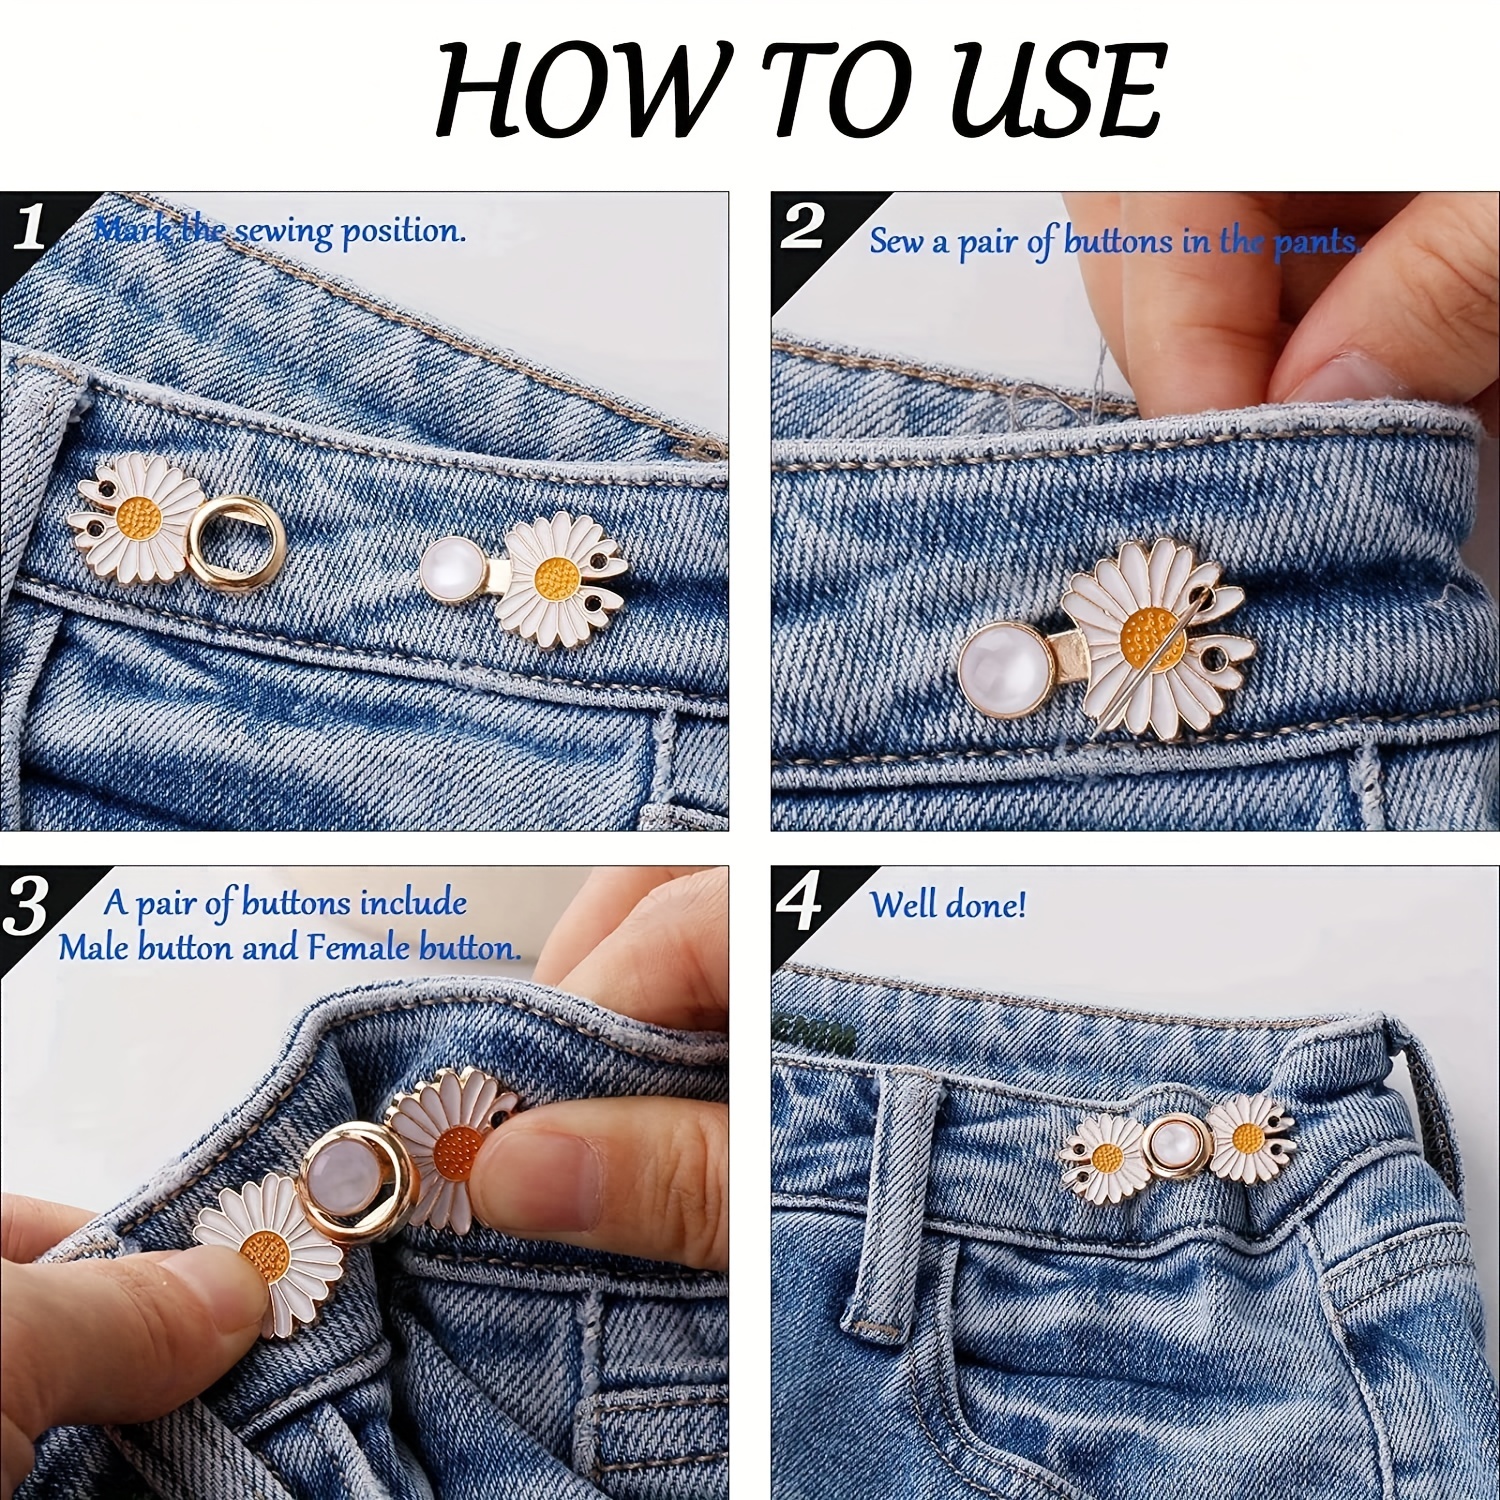 GTAAOY Jean Button Pins, 6PCS Pant Waist Tightener, Adjustable Jean Button,  No-Sewing Waist Adjustment Clip to Size Down, Jeans Button Replacement